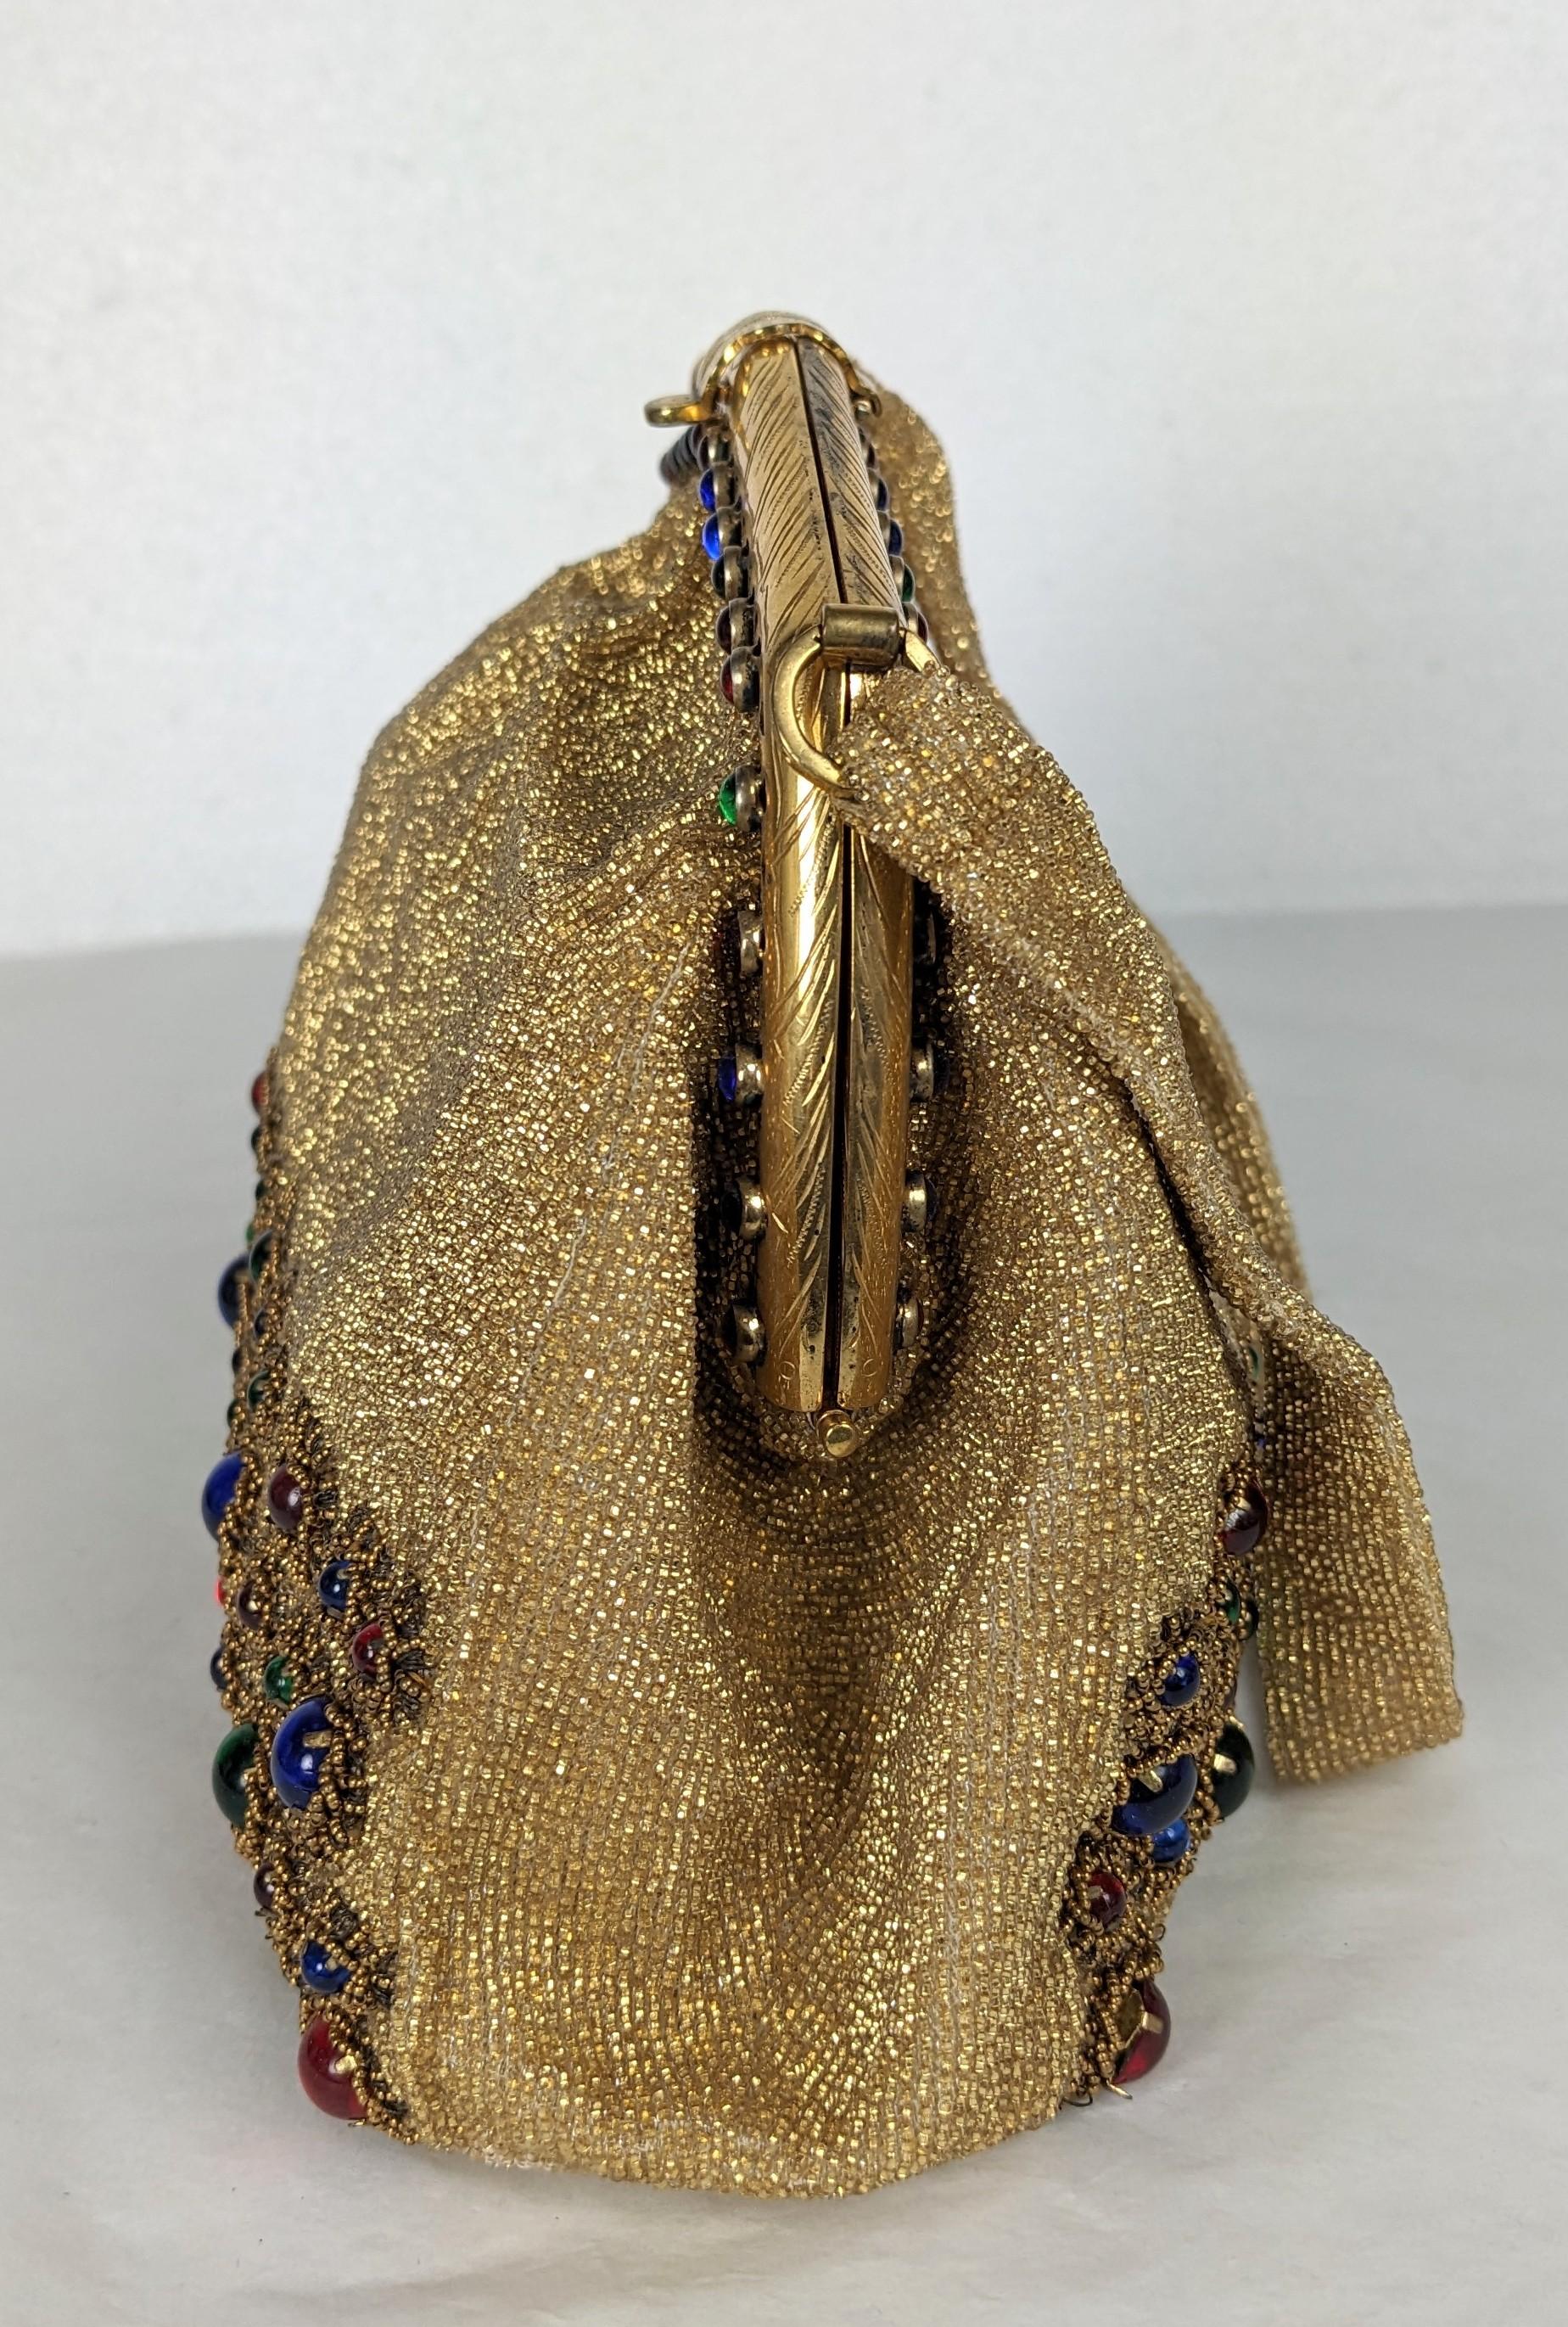 Elaborate Beaded French Evening Bag, Saks Fifth Ave. For Sale 3